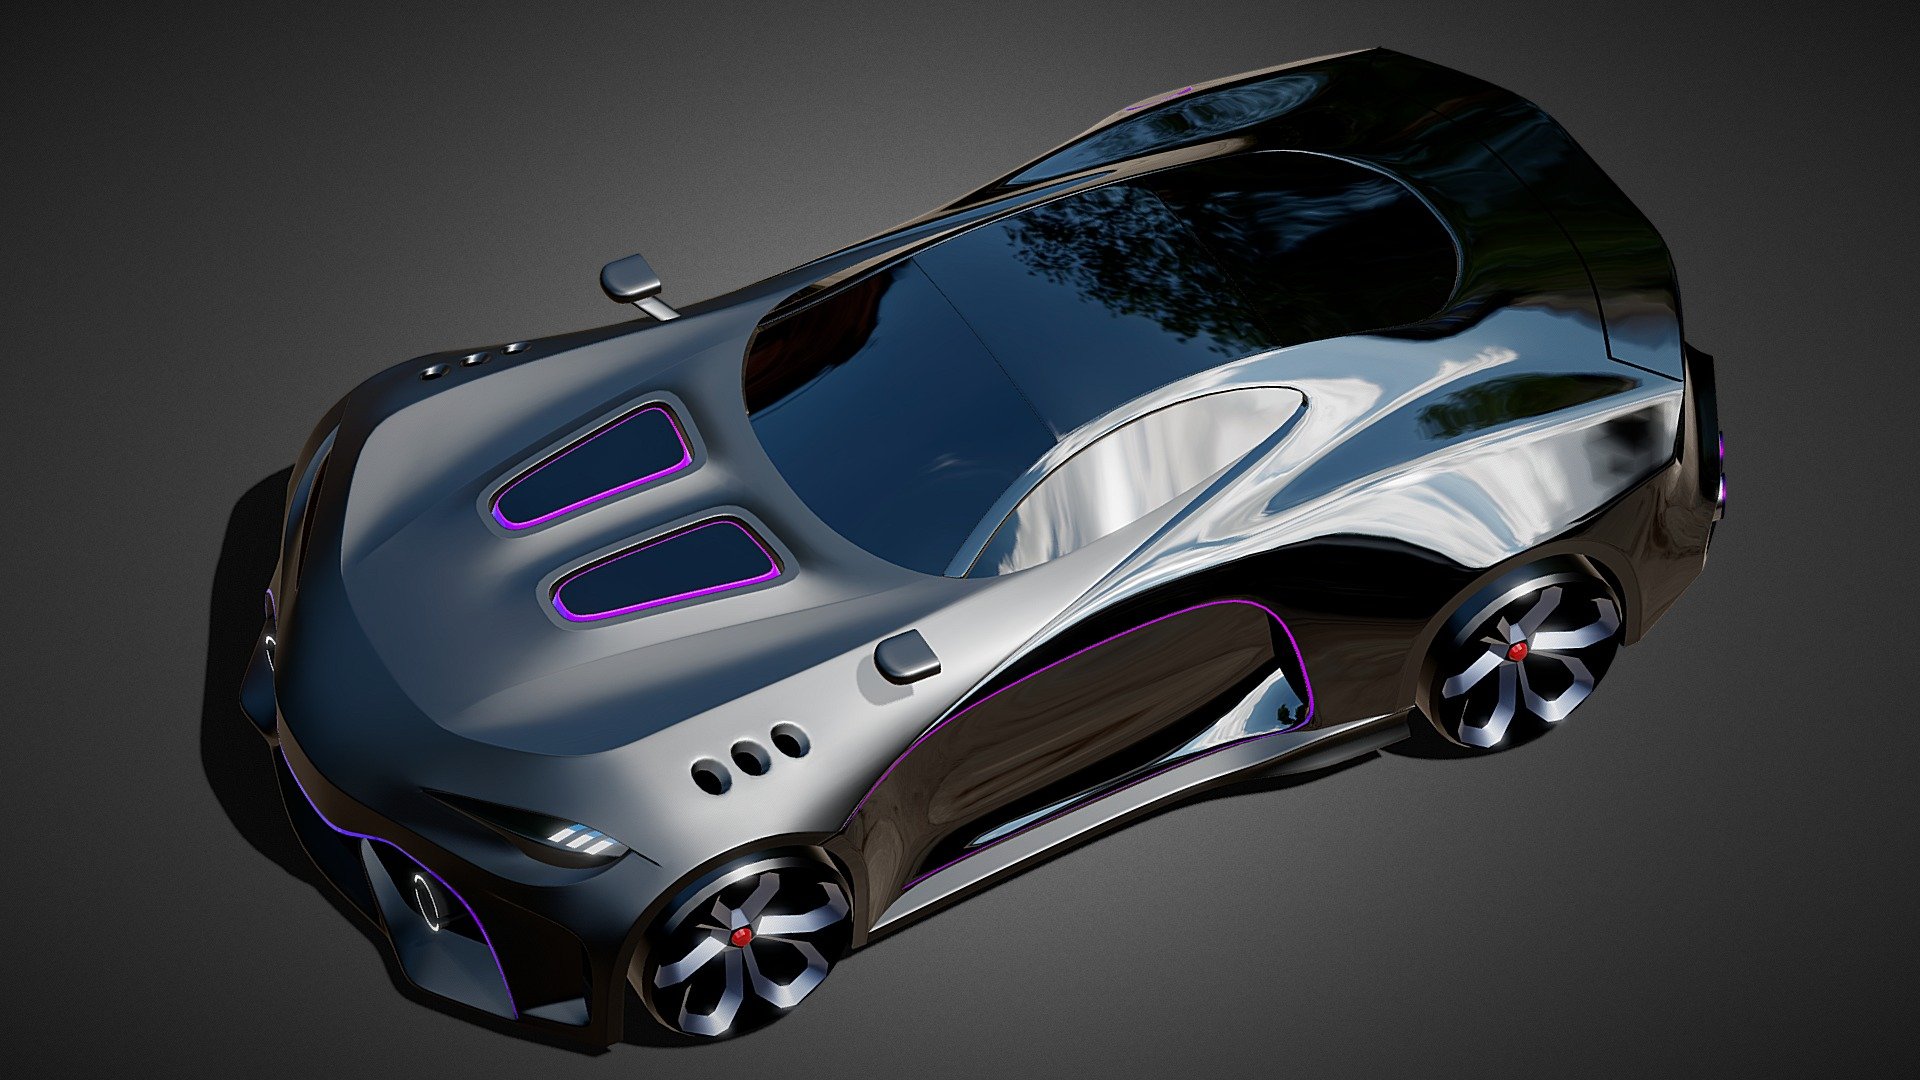 FUTURISTIC CONCEPT CAR (2022)  

https://youtu.be/5FSqkXslr74

High detailed 3D model artwork of a futuristic concept car (coupe body style) that was made originally in Blender from scratch. This model is suitable for use in CGI projects, visualisations, games, movies, animations, etc. The package includes additional export 3D formats that can be opened in other software than Blender.

The model has clean and optimized geometry

Faces: 43,500 / Vertices: 45,500 / Triangles: 85,500

There are 24 individual objects / meshes in the whole scene

The model comes with applied modifiers / textures / materials.

Materials: 20 / Textures: 0 / UV Unwrapping: No / Rigging: No

The model is ready to render in Blender / Eevee

Included 3D formats: OBJ / FBX / DAE / GLB glTF / BLEND - Concept Car (2022) - Buy Royalty Free 3D model by Rossty (@rossty05) 3d model